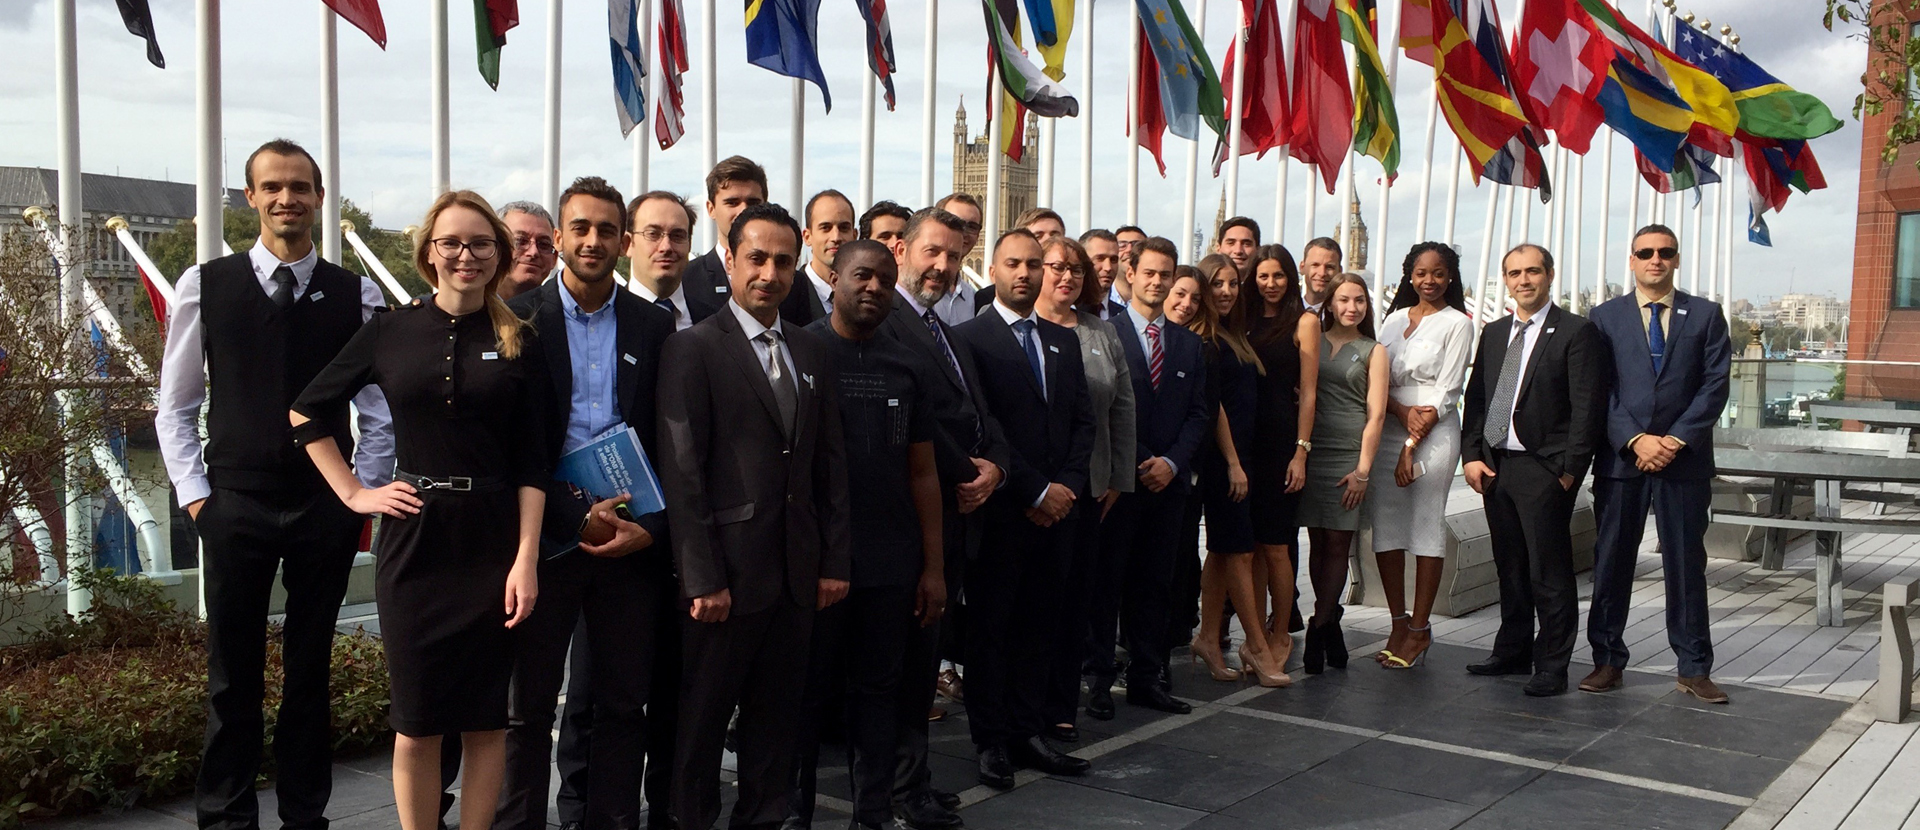 Solent's maritime students at the International Maritime Organization's headquarters in London